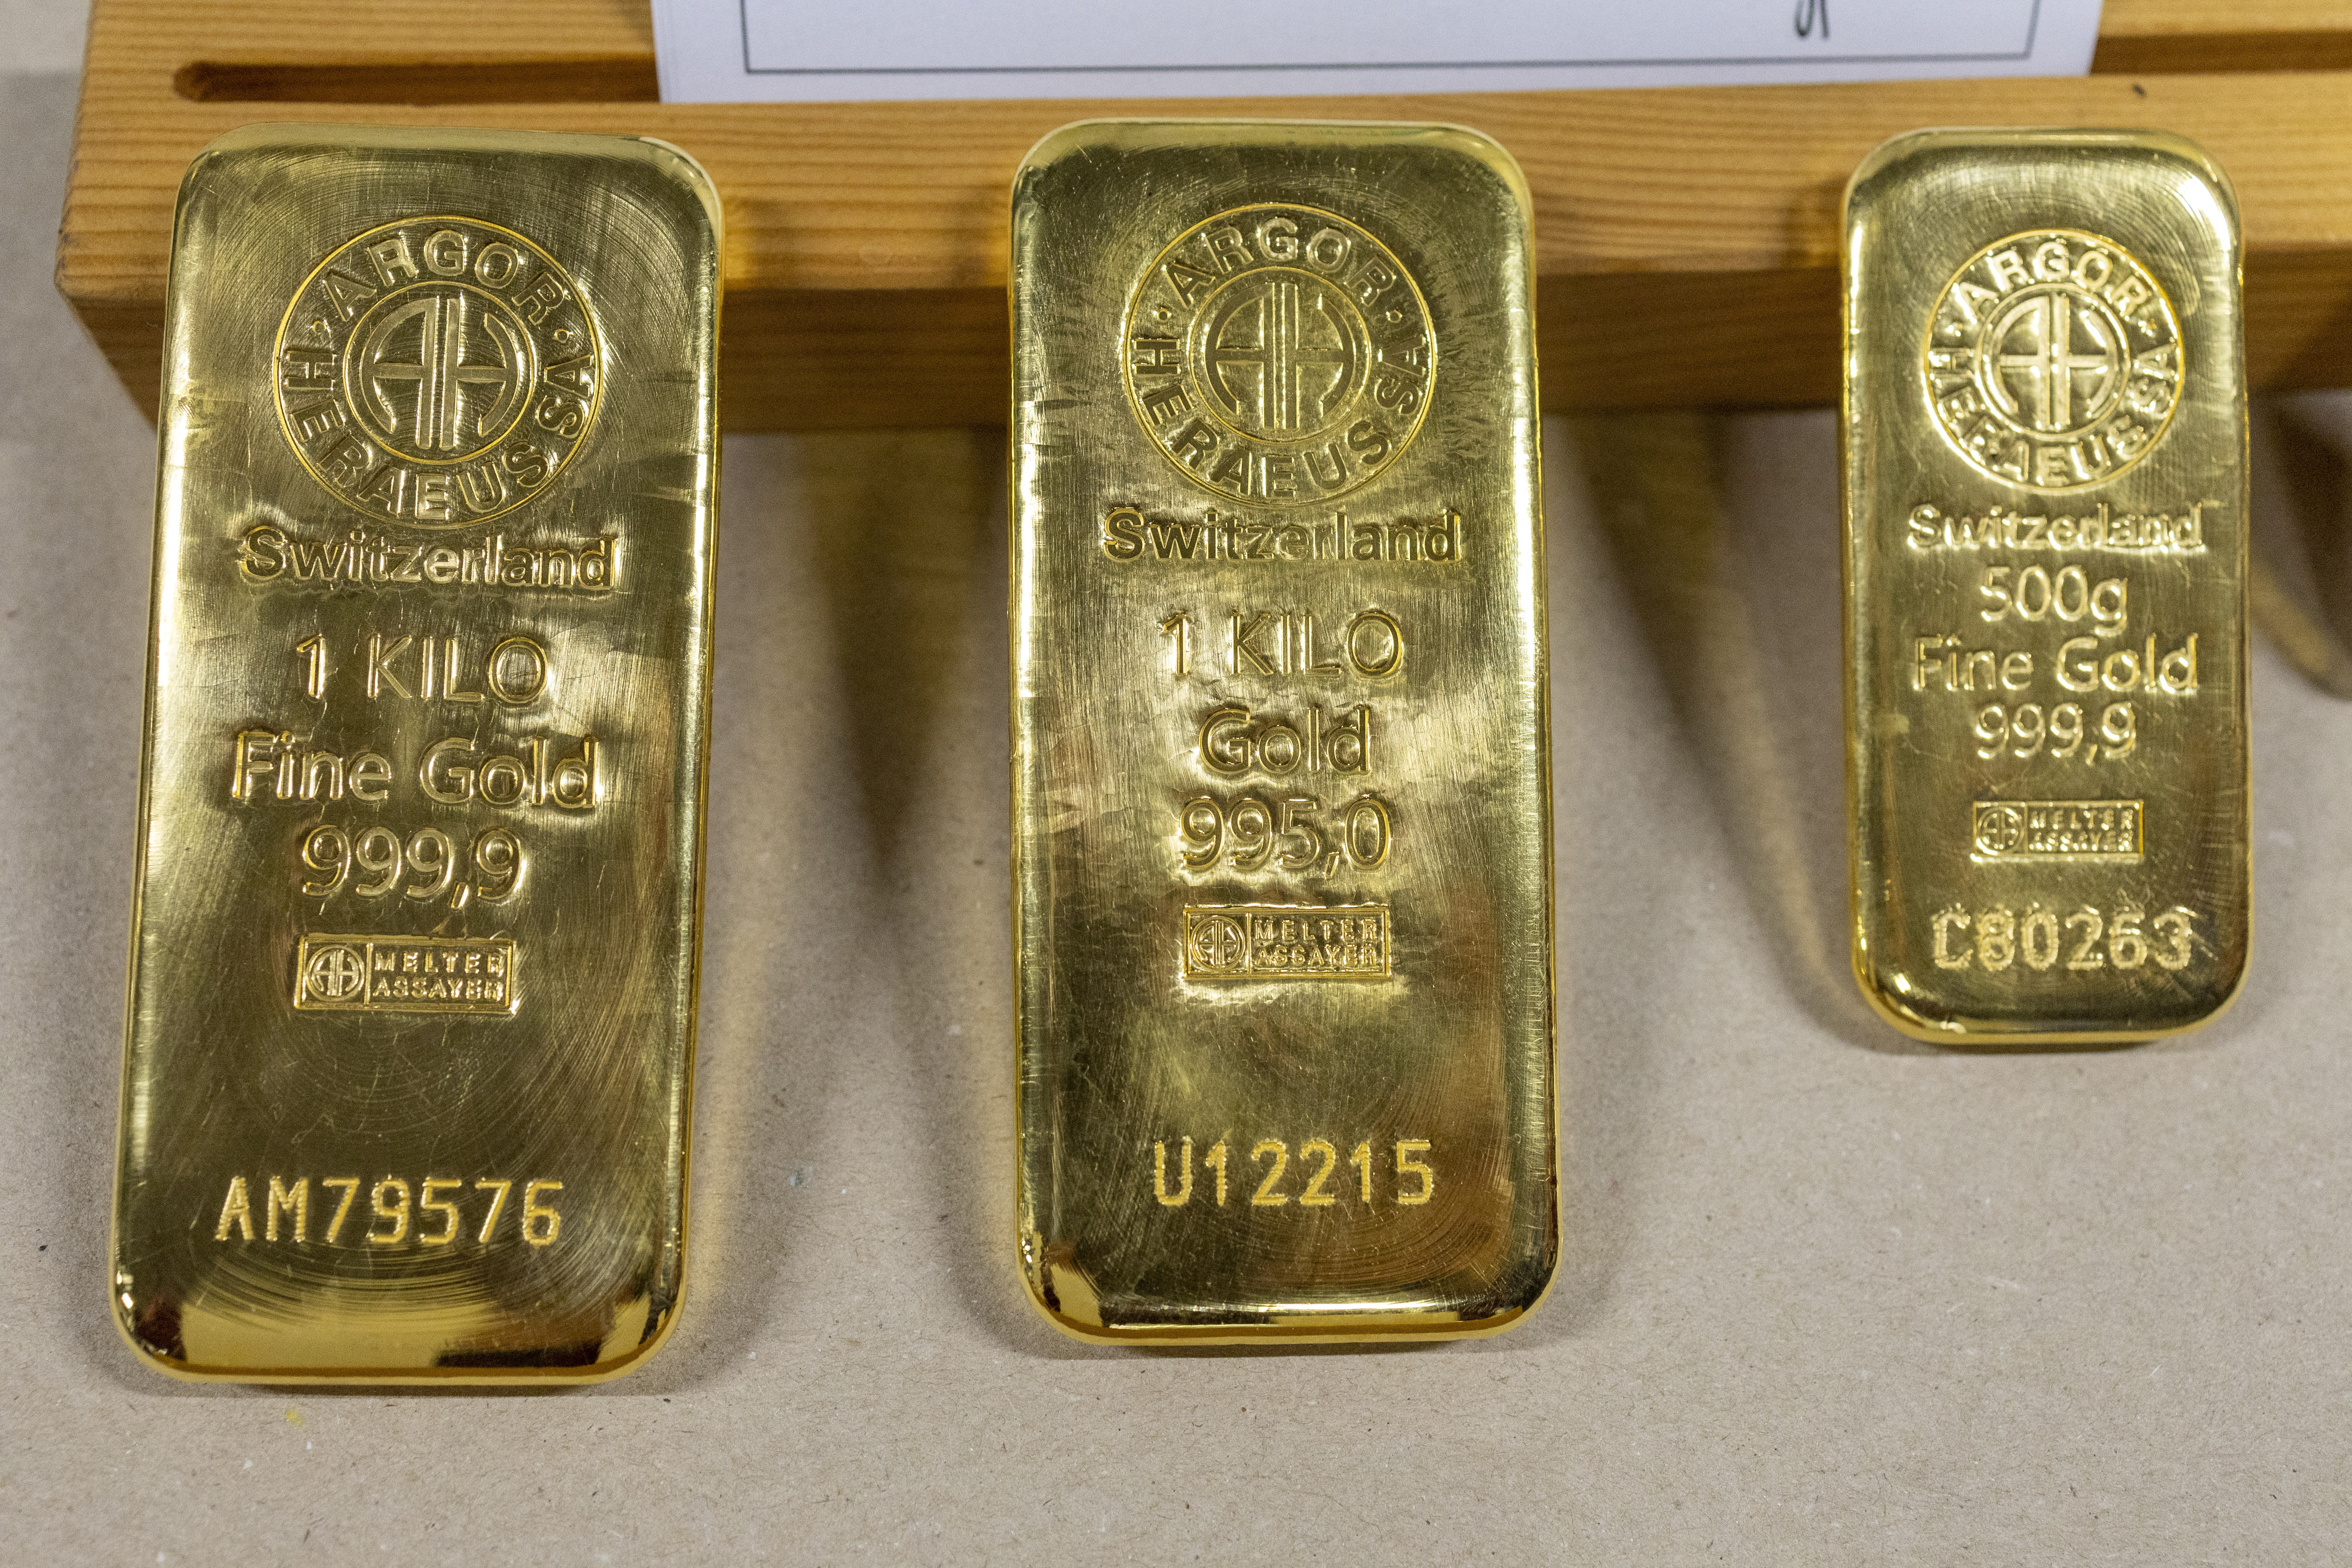 Gold bars are pictured in a display area at the plant of Argor-Heraeus in Mendrisio